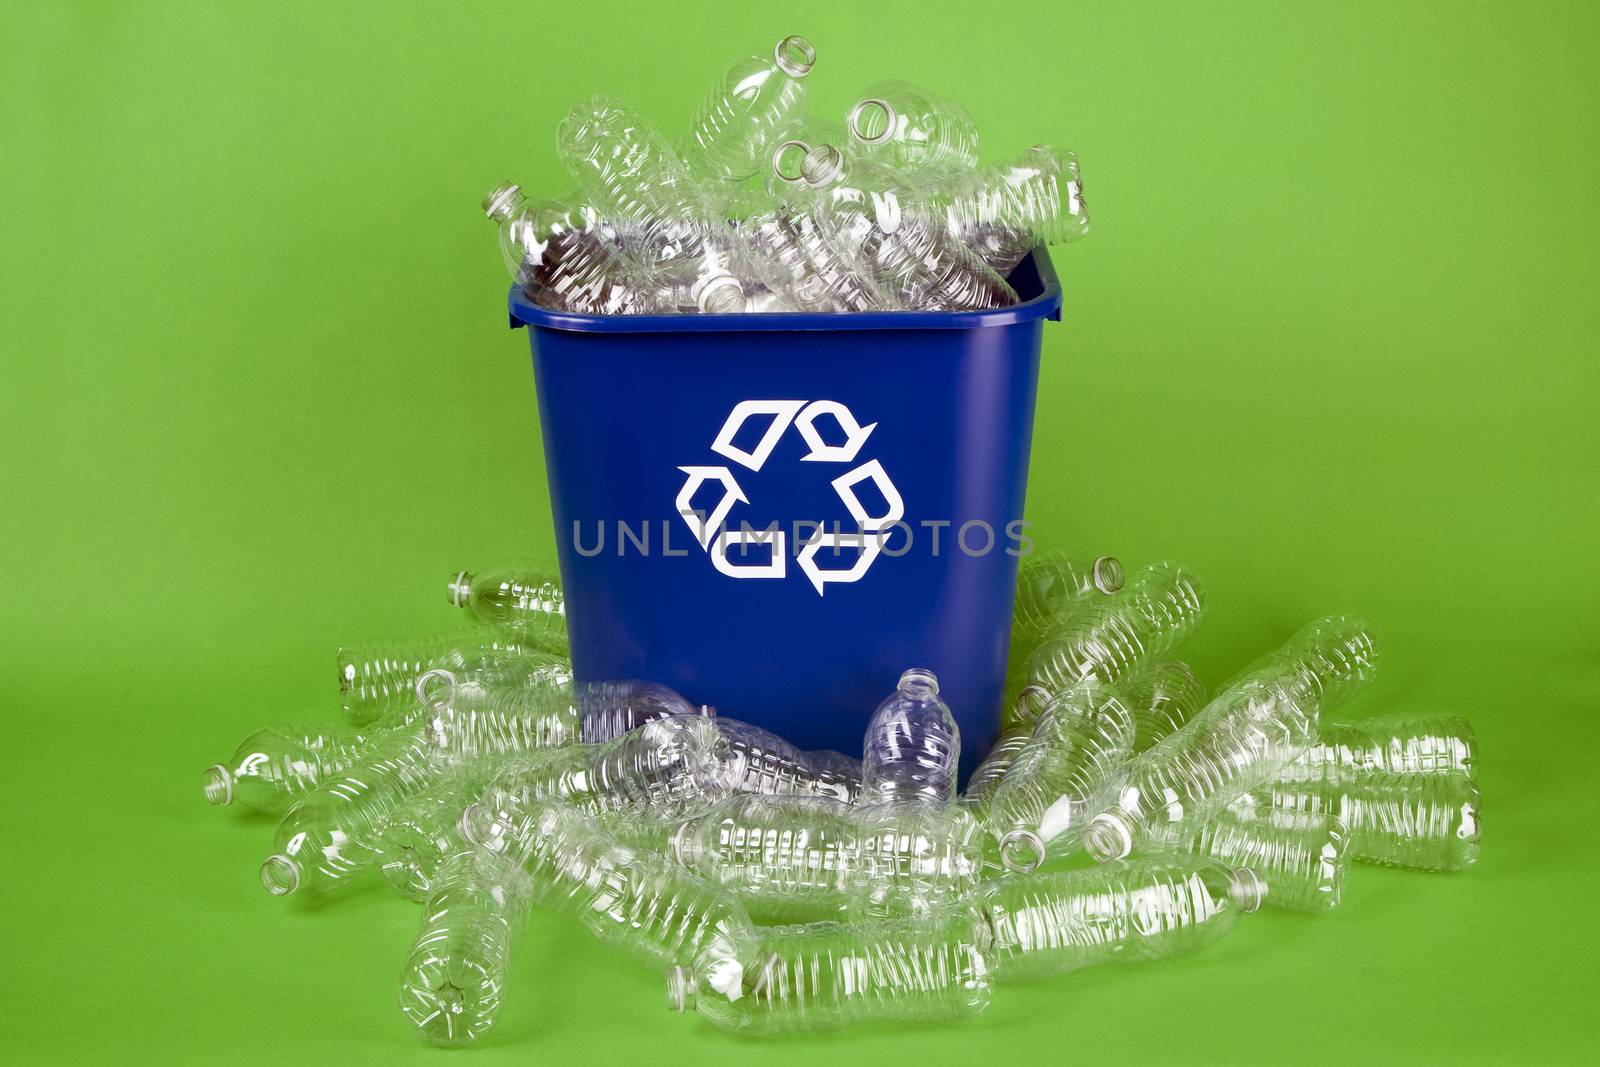 Recycling plastic water bottles by jimmartin